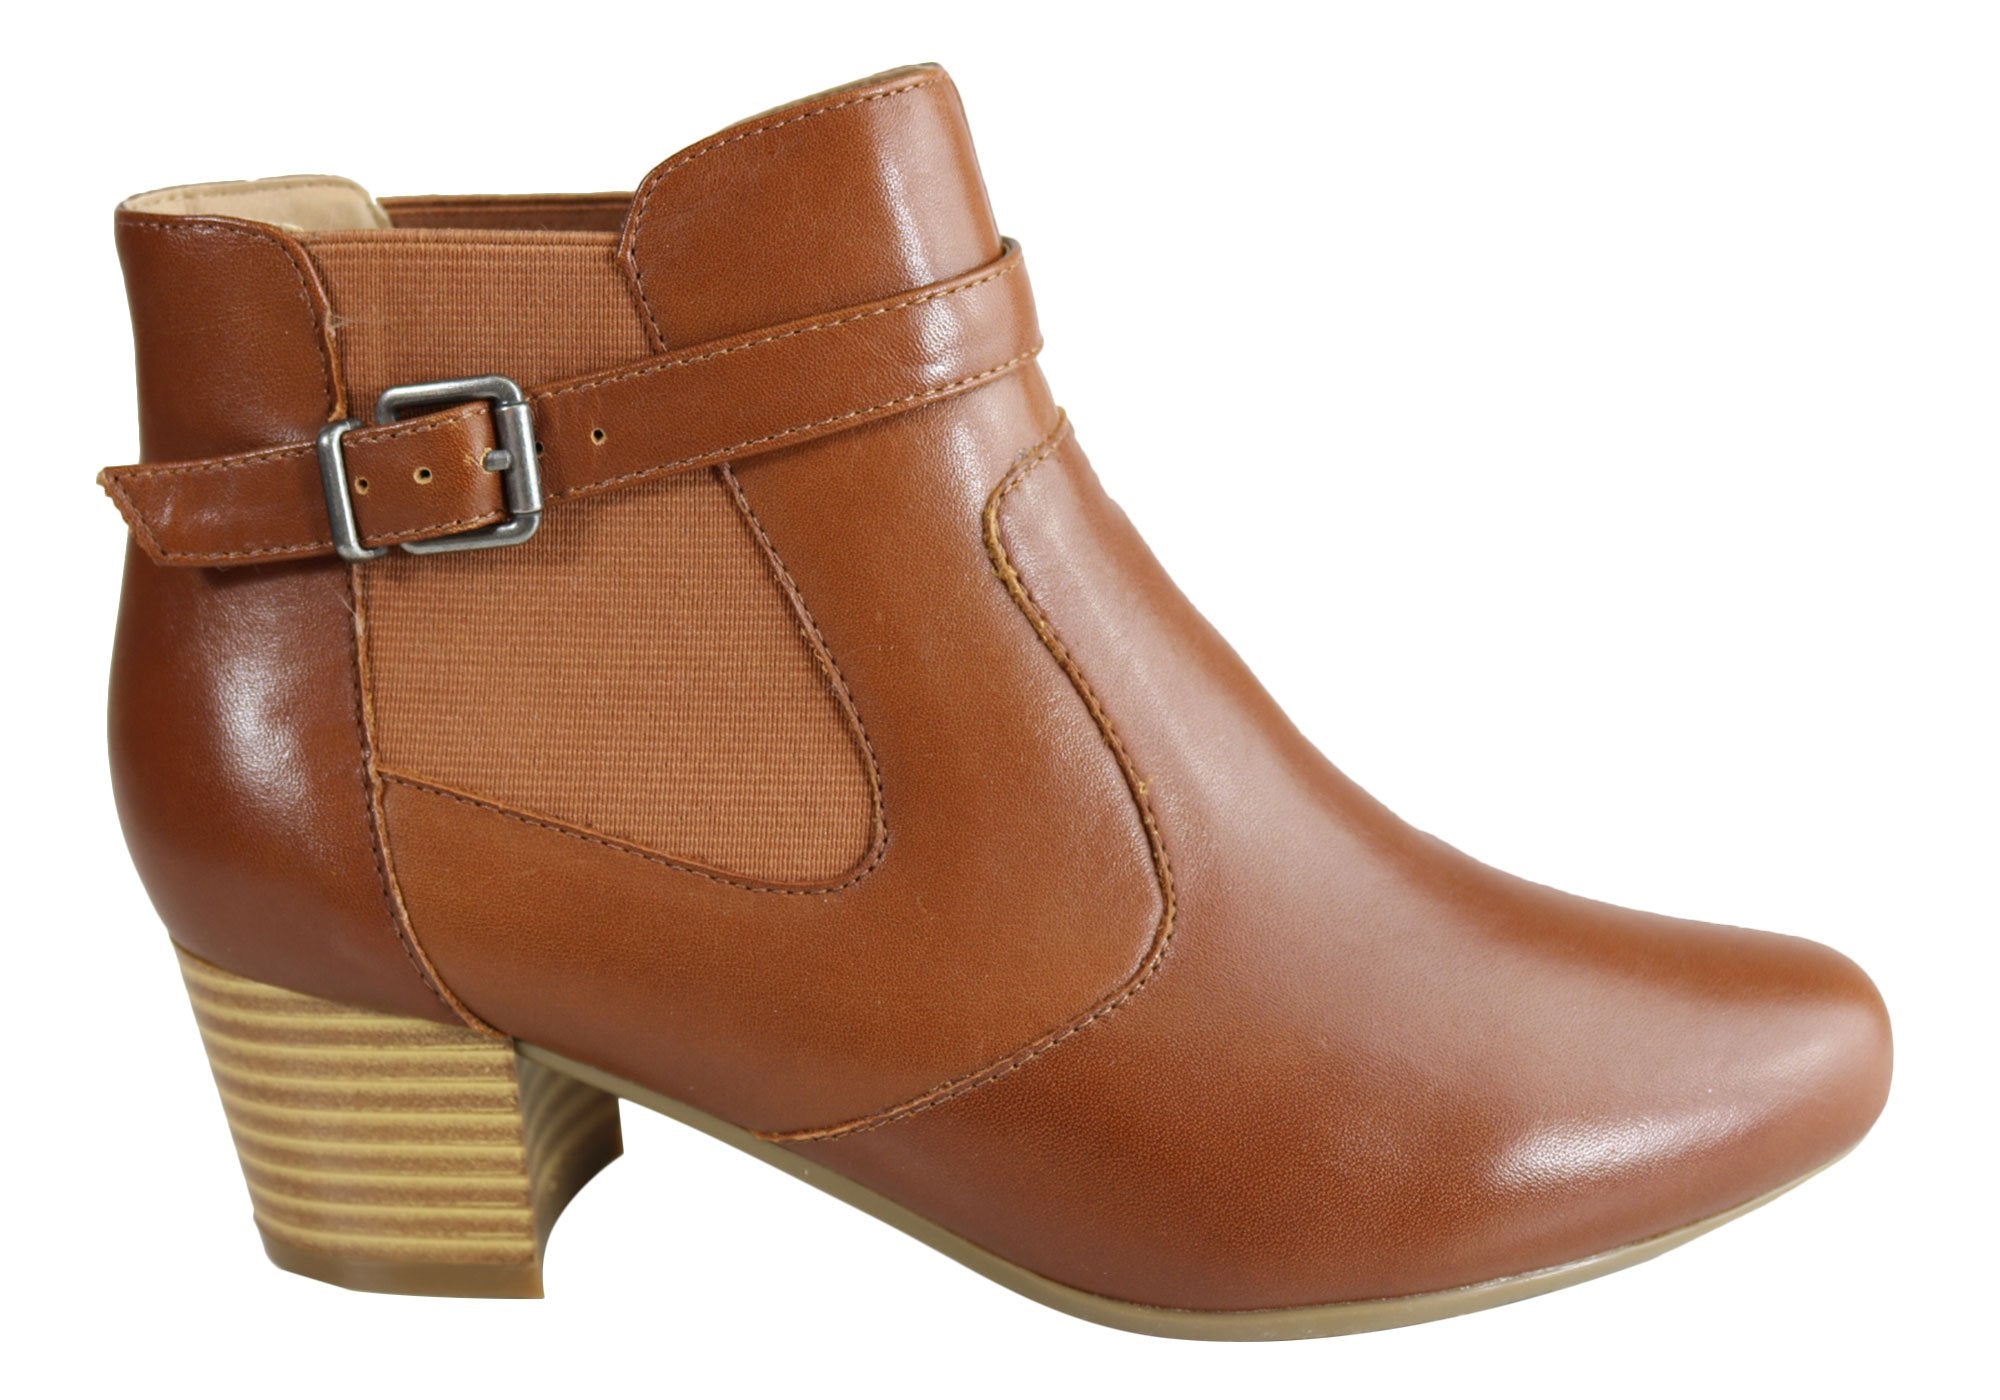 What are the most comfortable women’s boots?